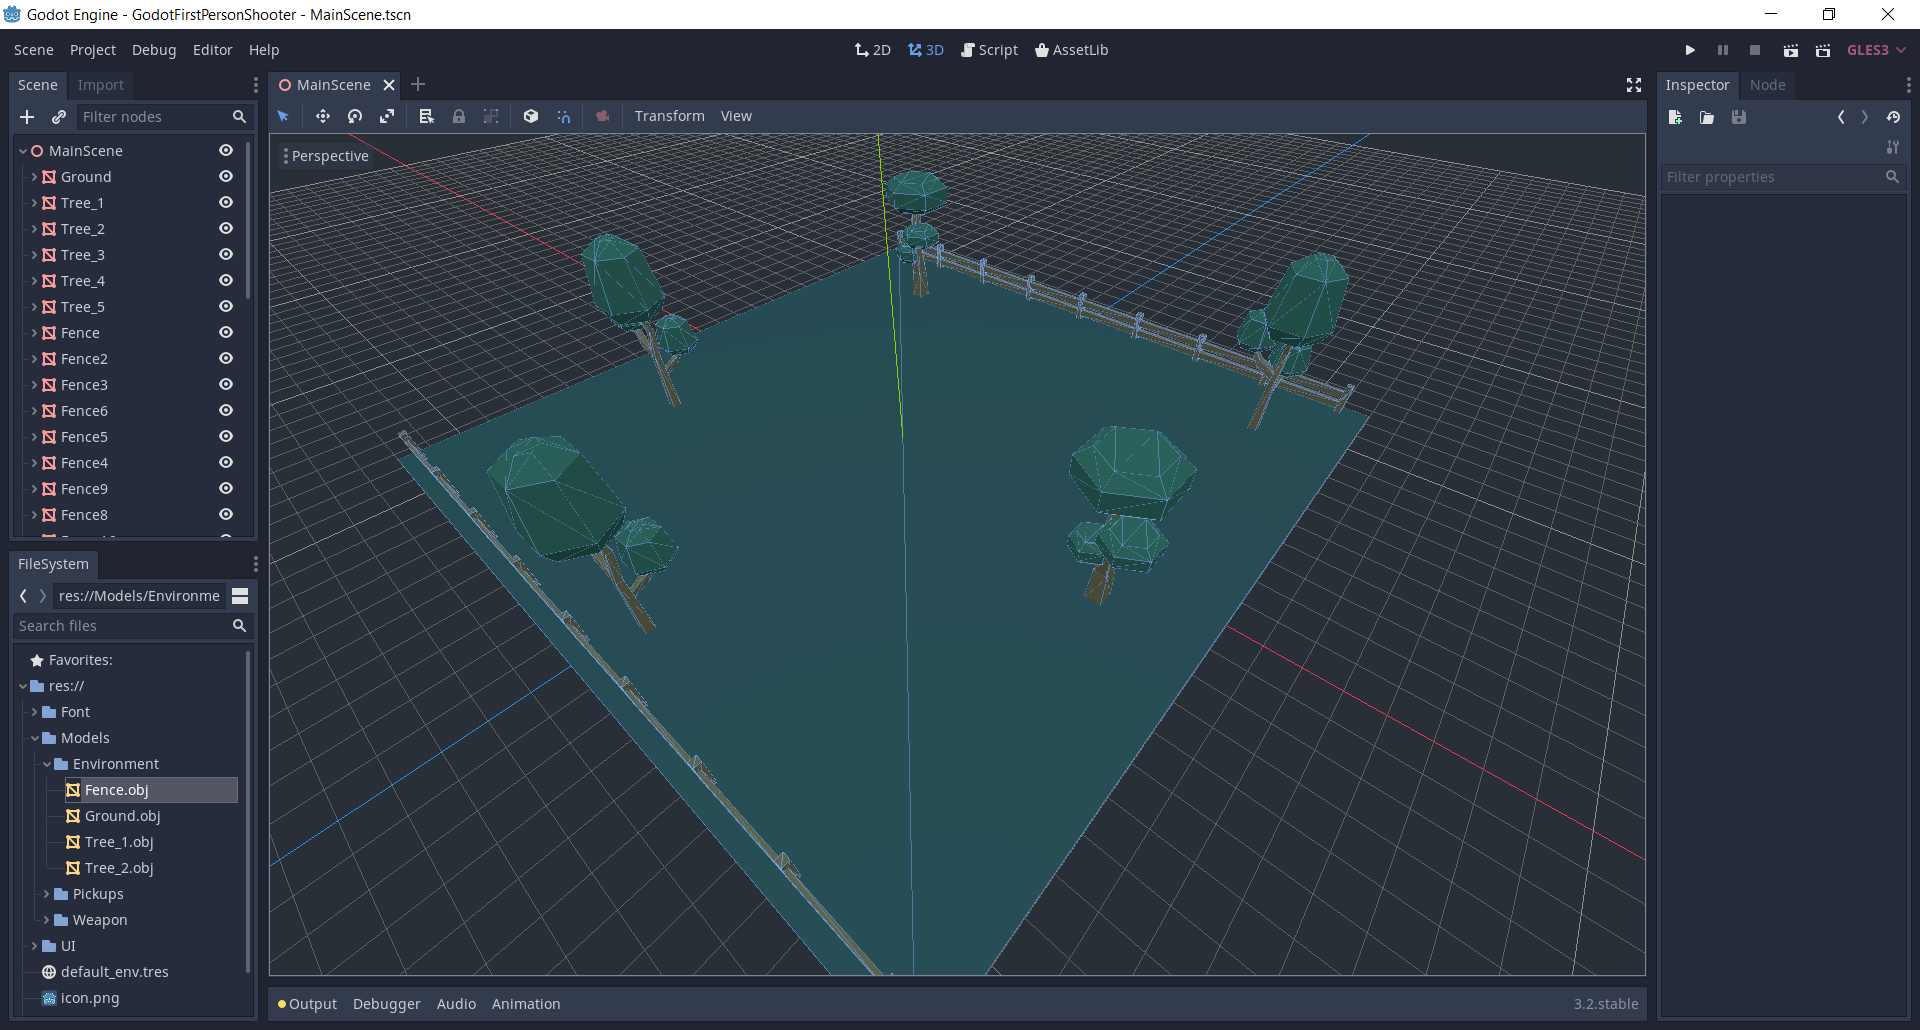 Godot level with grass plains and trees